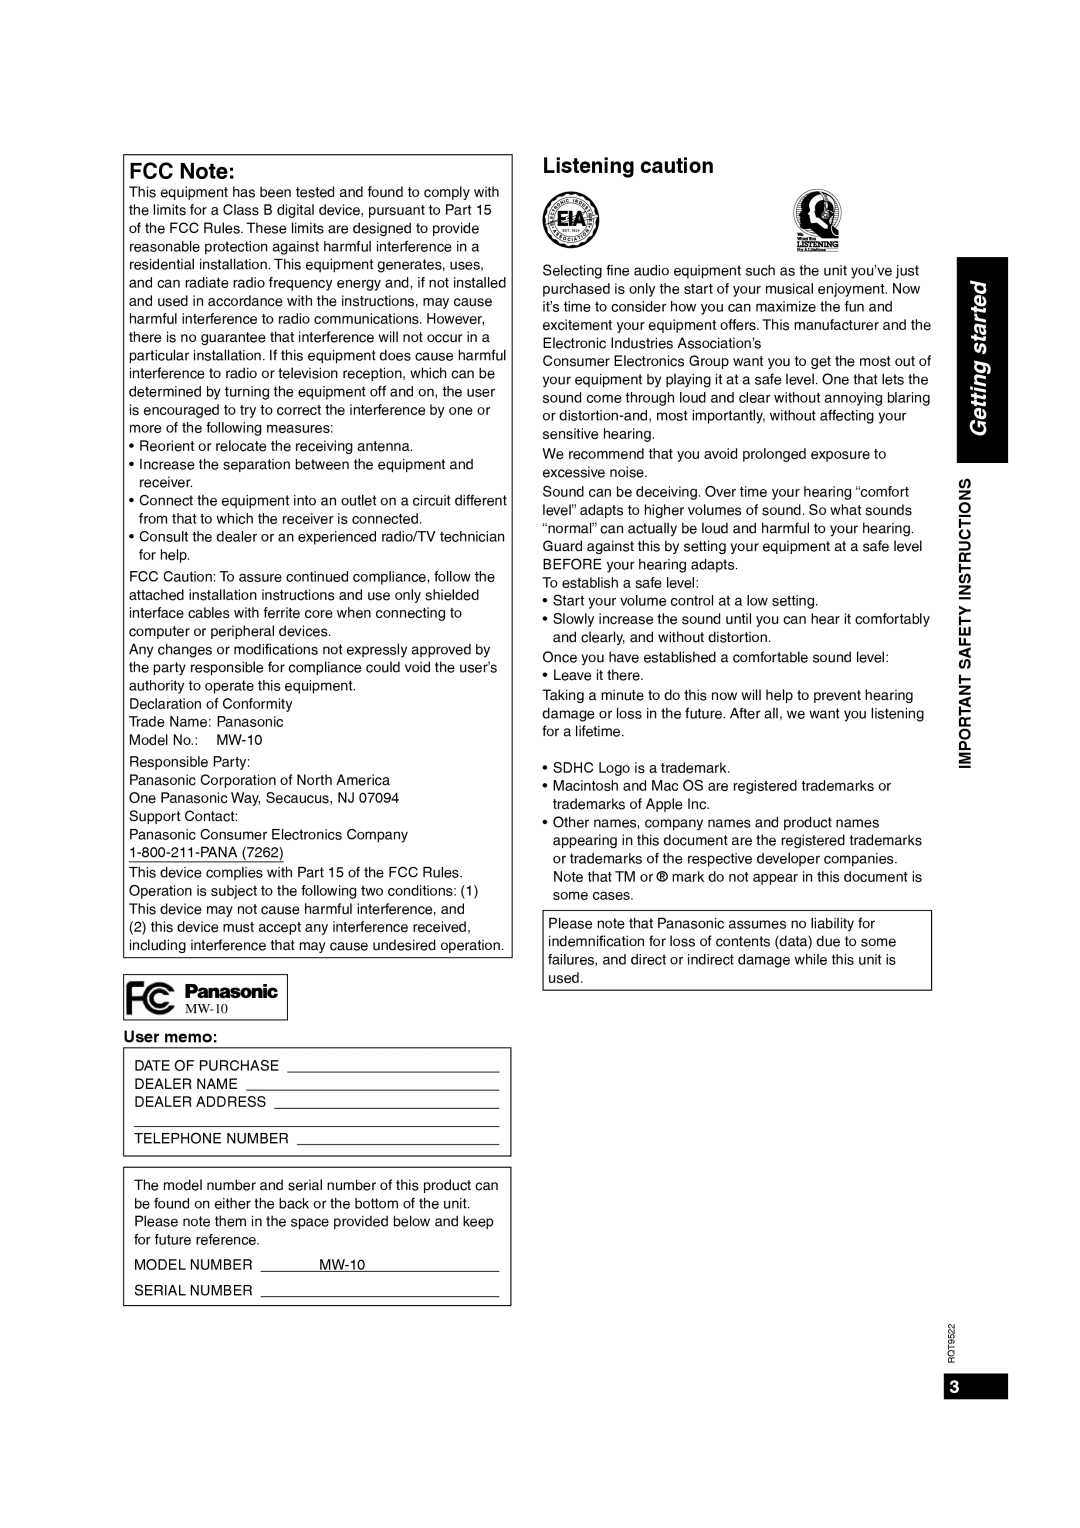 Panasonic MW-10 operating instructions FCC Note, Listening caution, started, User memo 